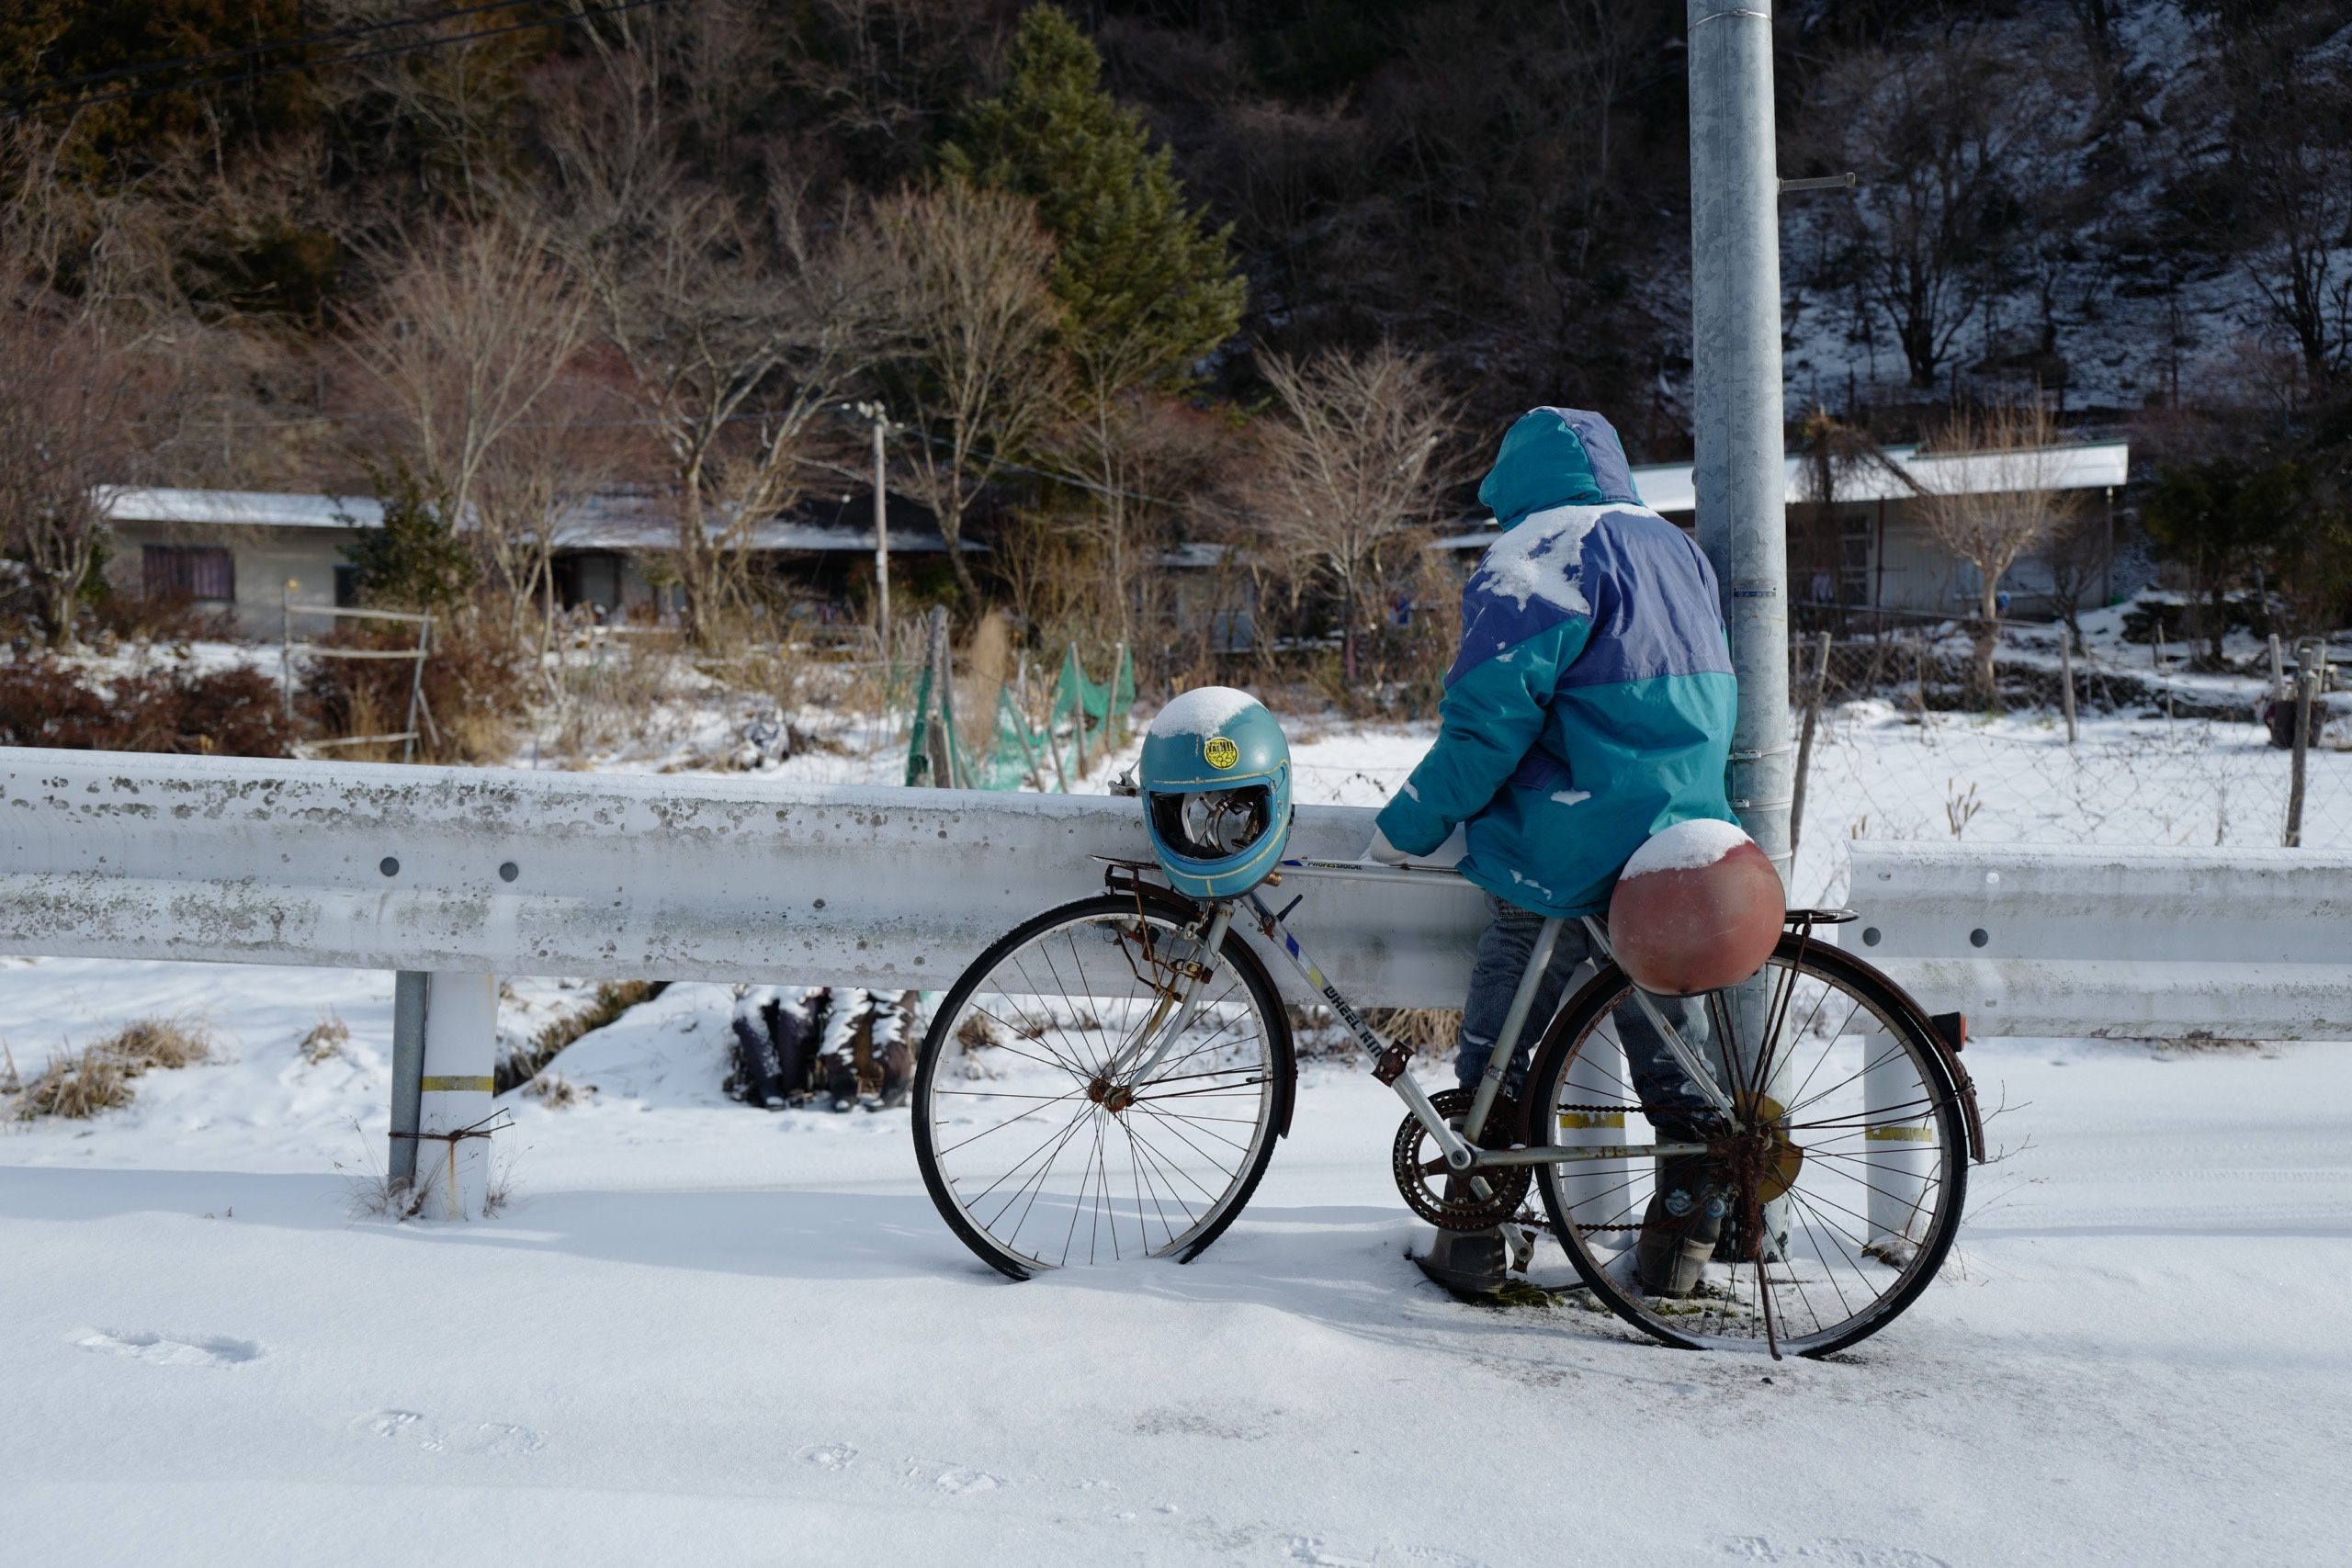 A doll stands by its bicycle in the snow.